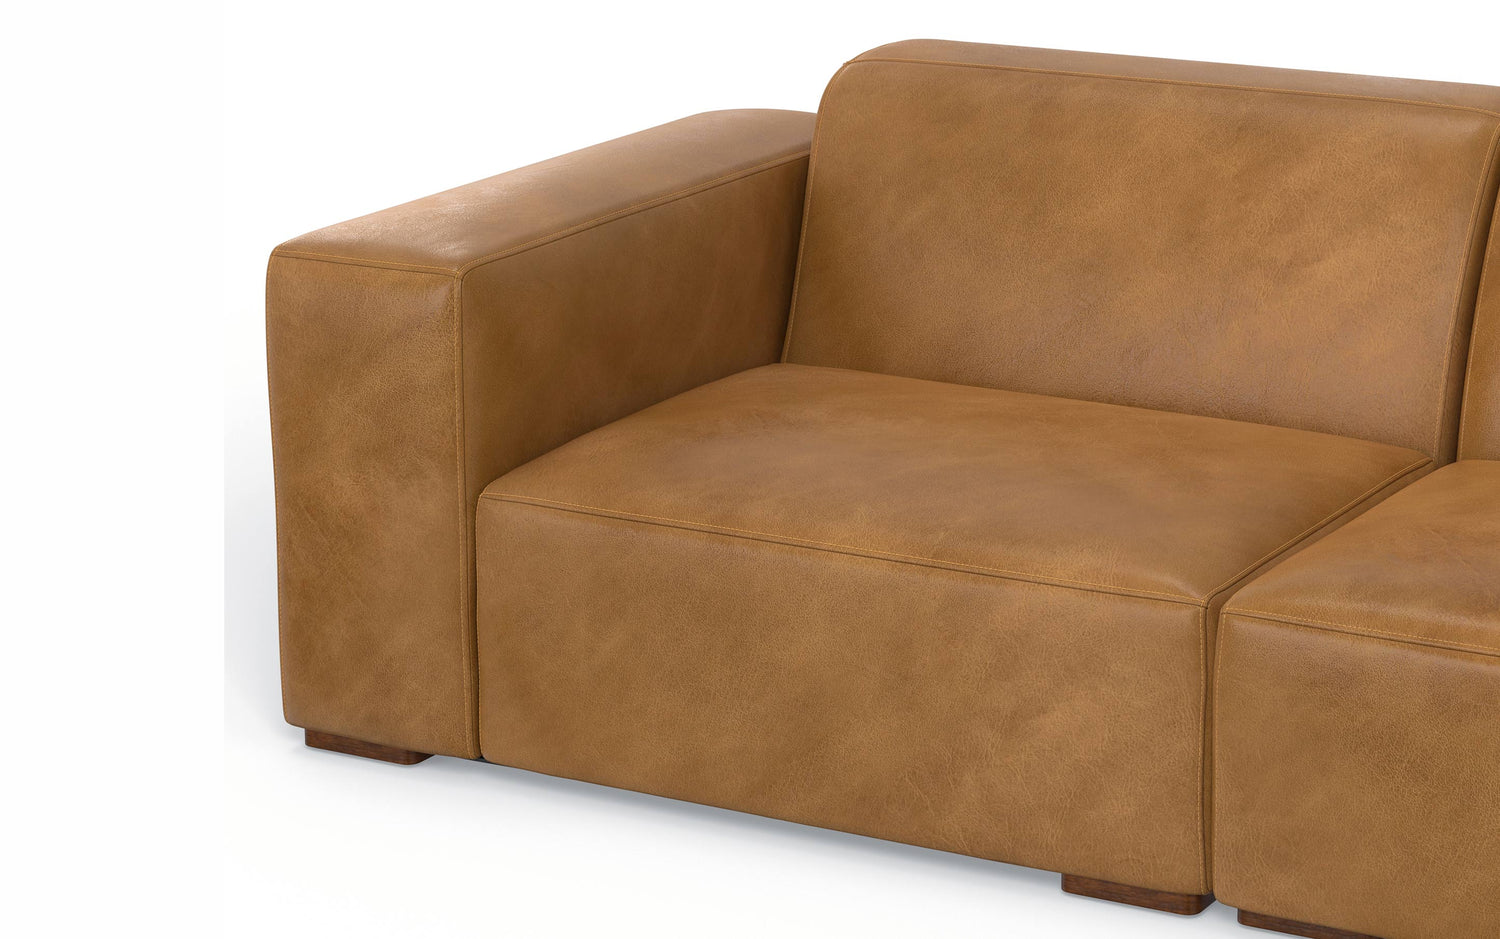 Sienna Genuine Leather | Rex 3 Seater Sofa in Genuine Leather